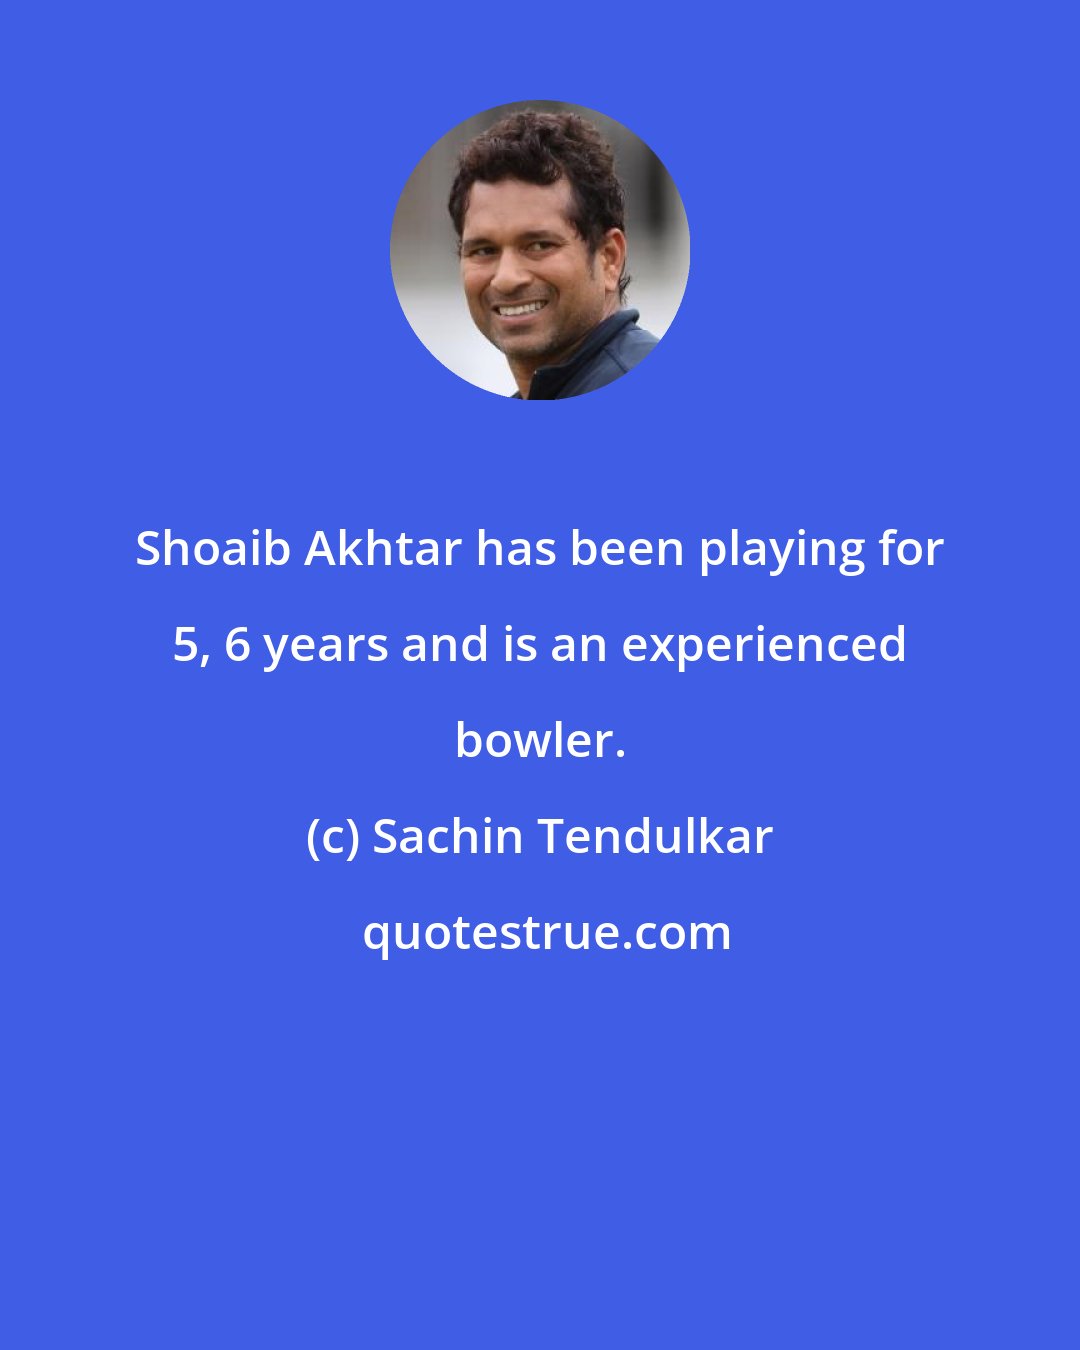 Sachin Tendulkar: Shoaib Akhtar has been playing for 5, 6 years and is an experienced bowler.